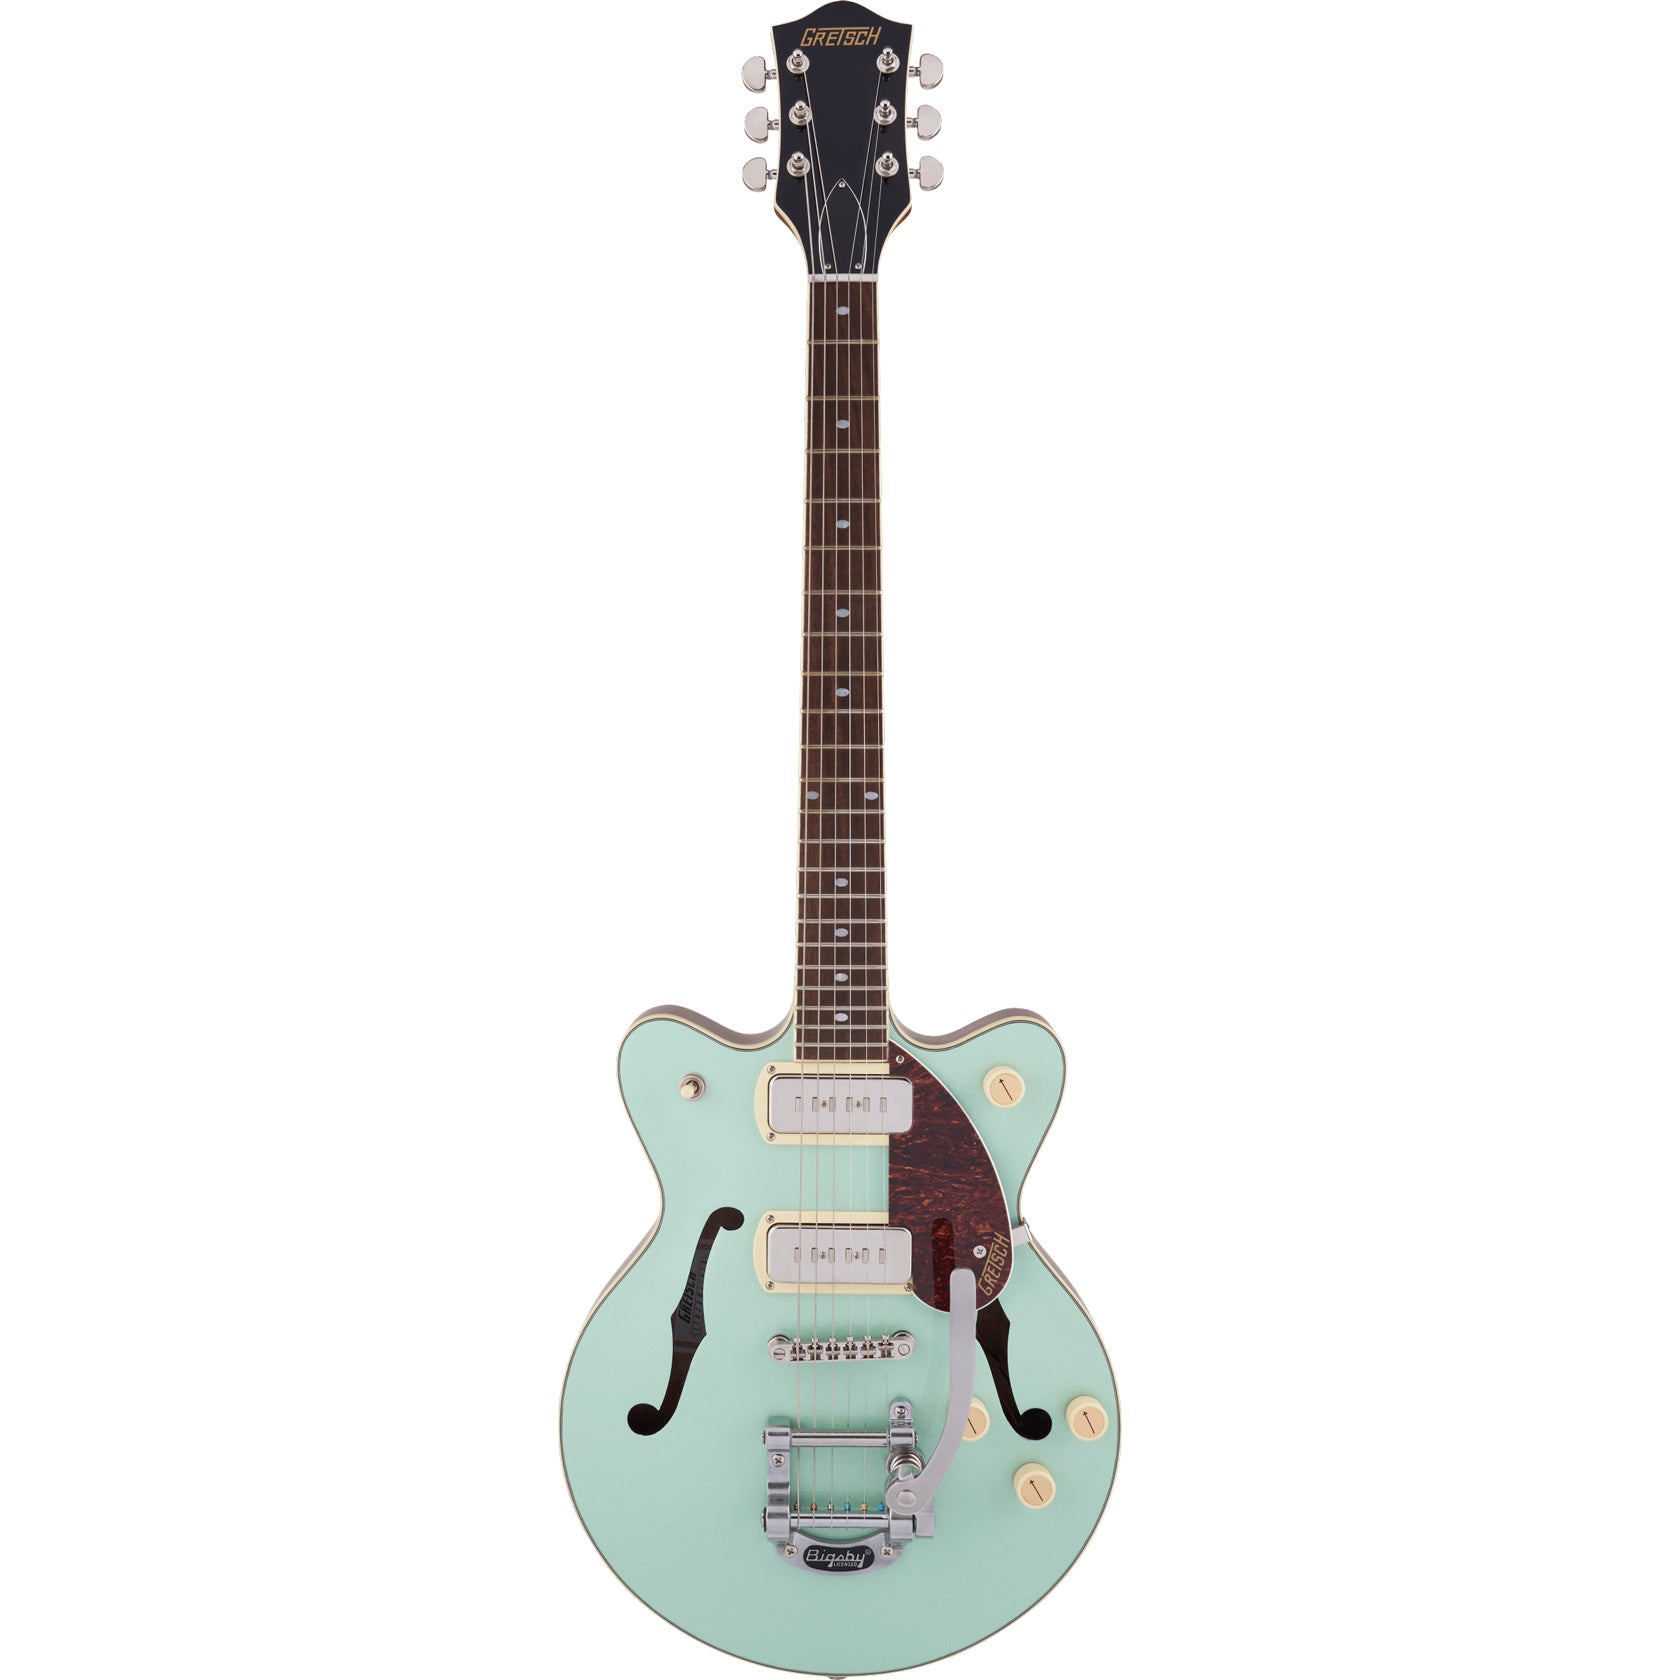 Gretsch G2655T-P90 Streamliner Center Block Jr. Double-Cut P90 with Bigsby Two-Tone Mint Metallic Vintage Mahogany Stain